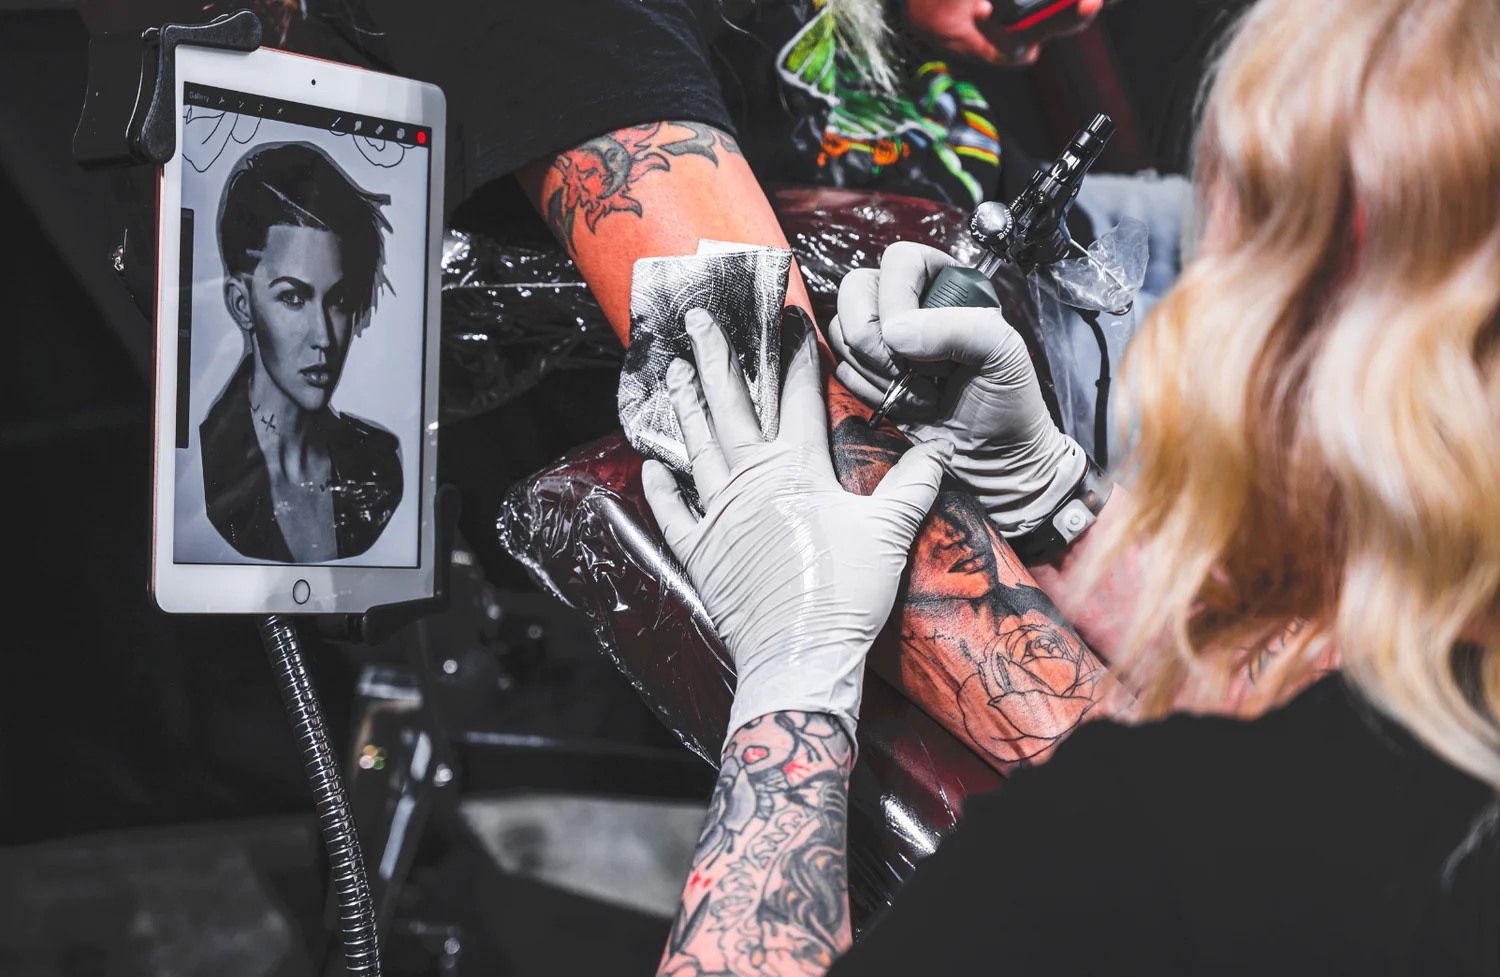 How to use Procreate's automation feature: View your tattoos on the client's body